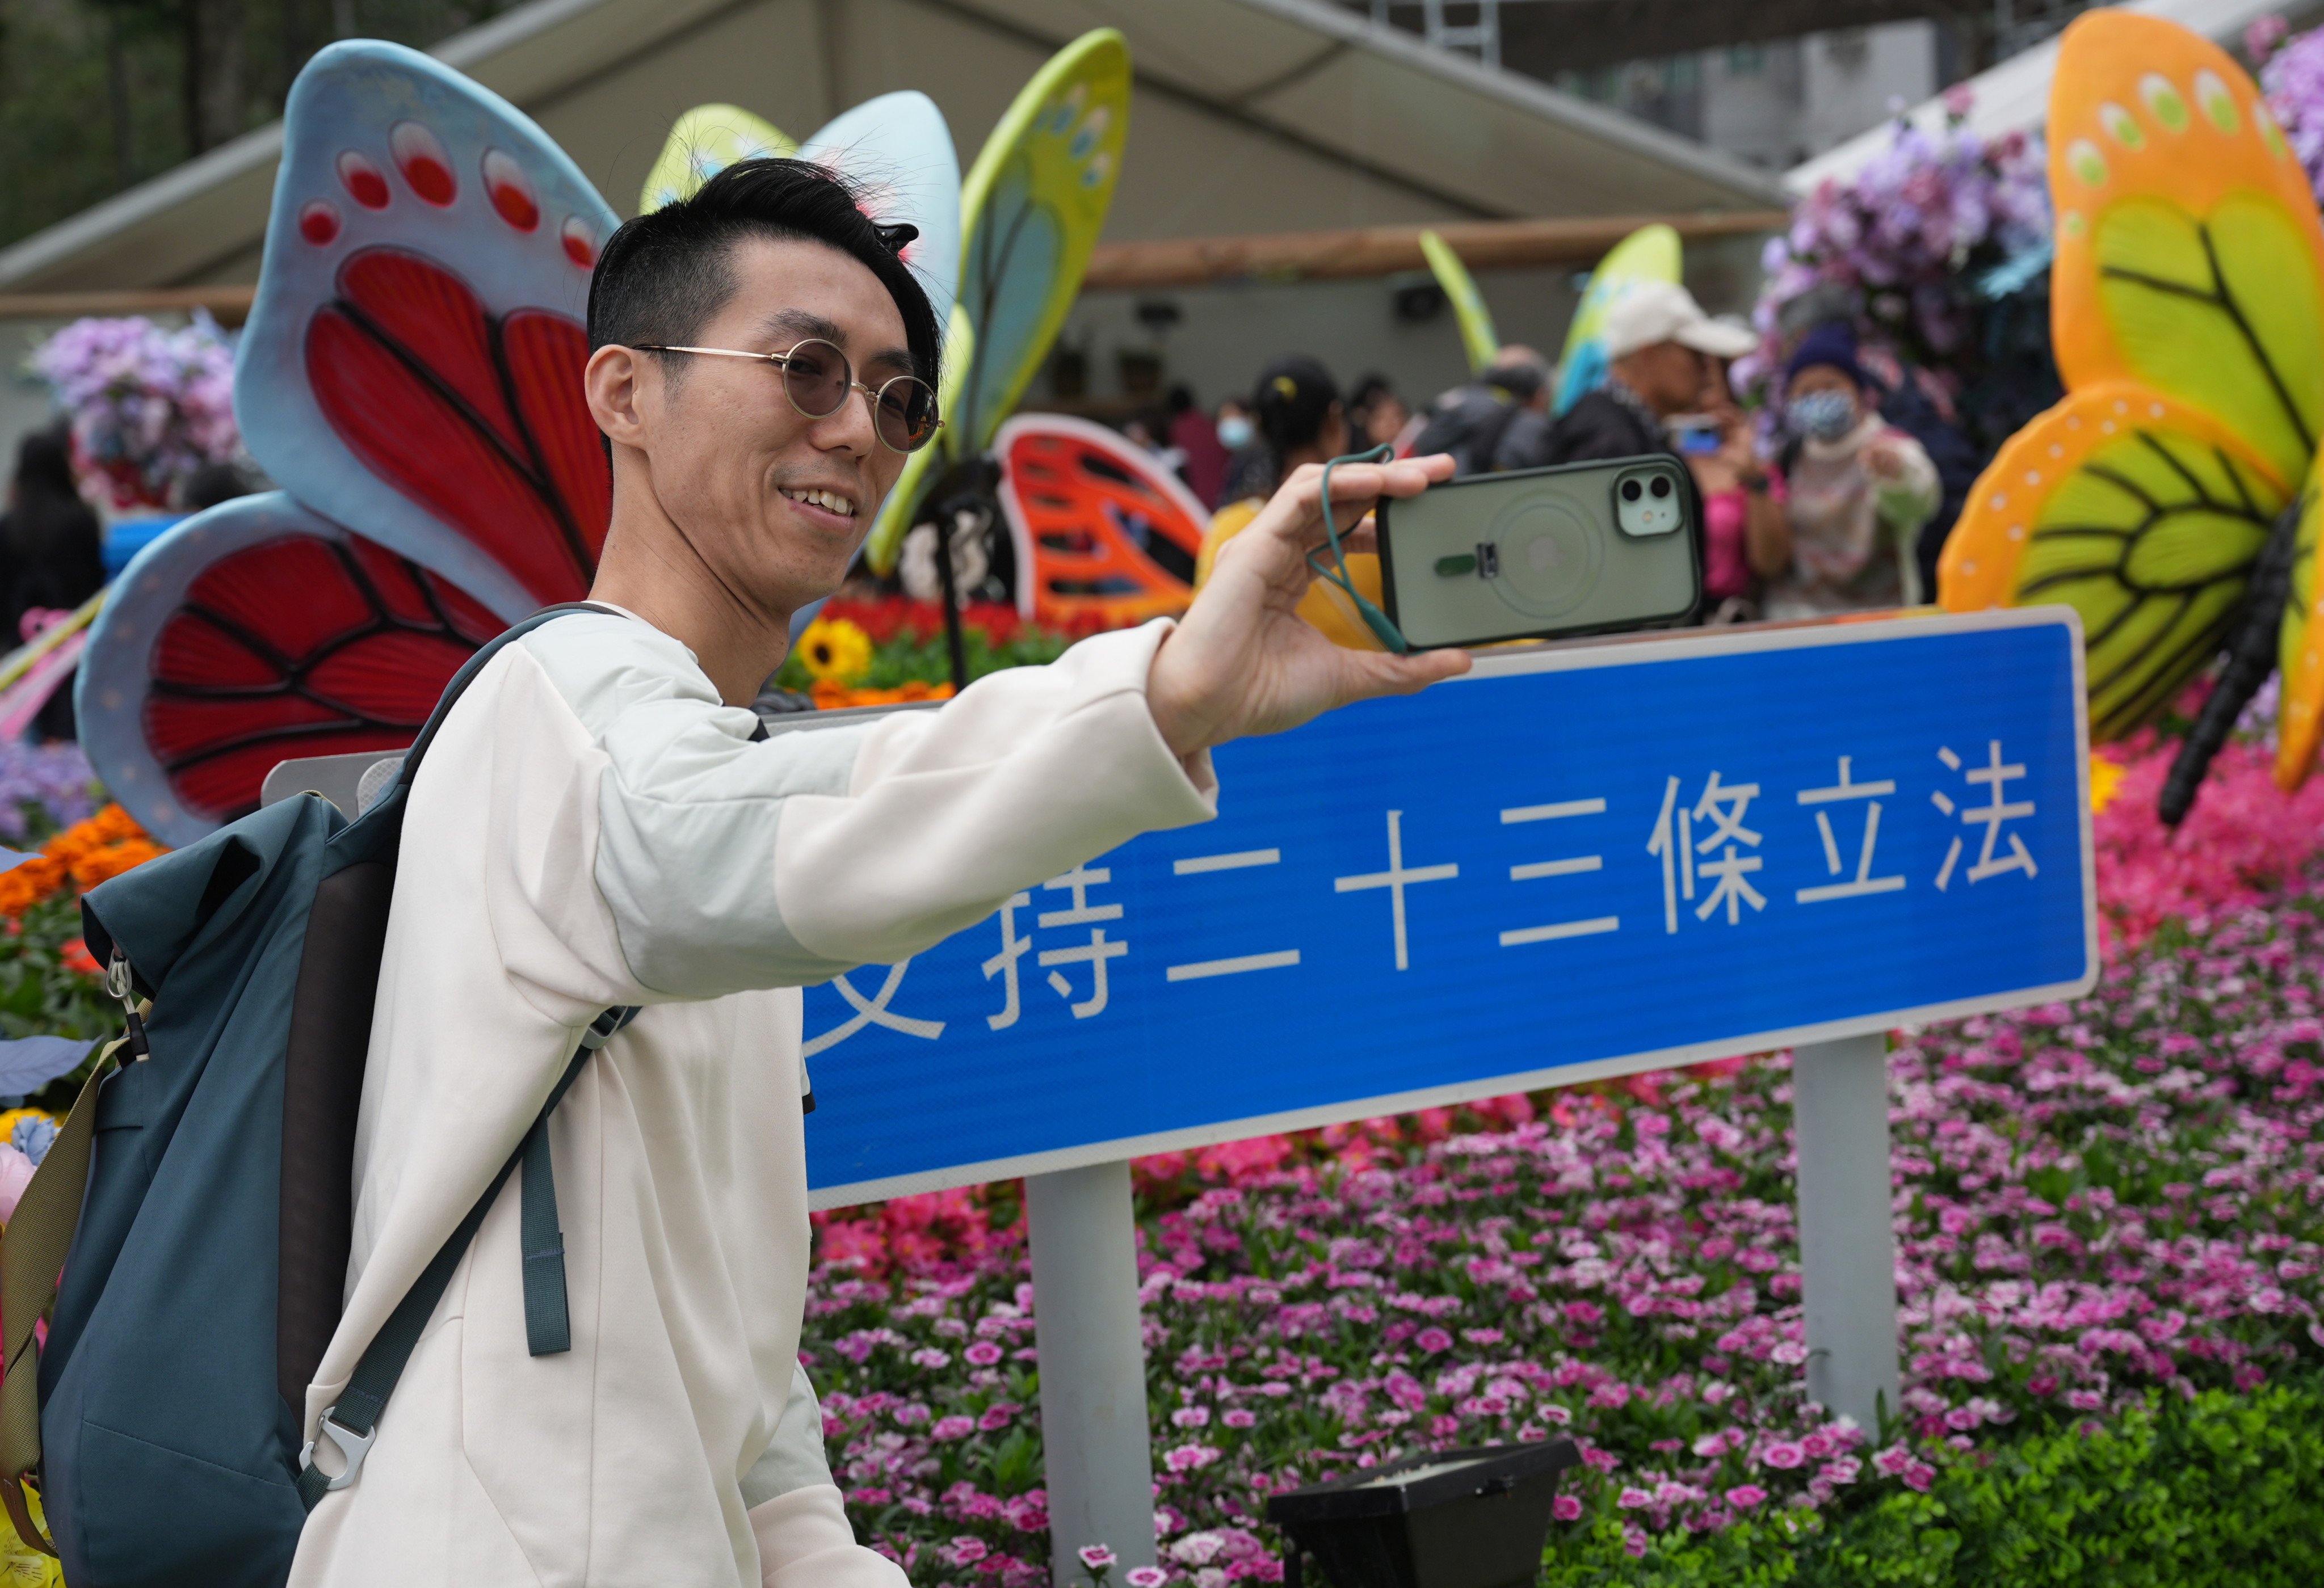 Visitors take selfies in front of a sign supporting the legislation of article 23. Photo: Eugene Lee